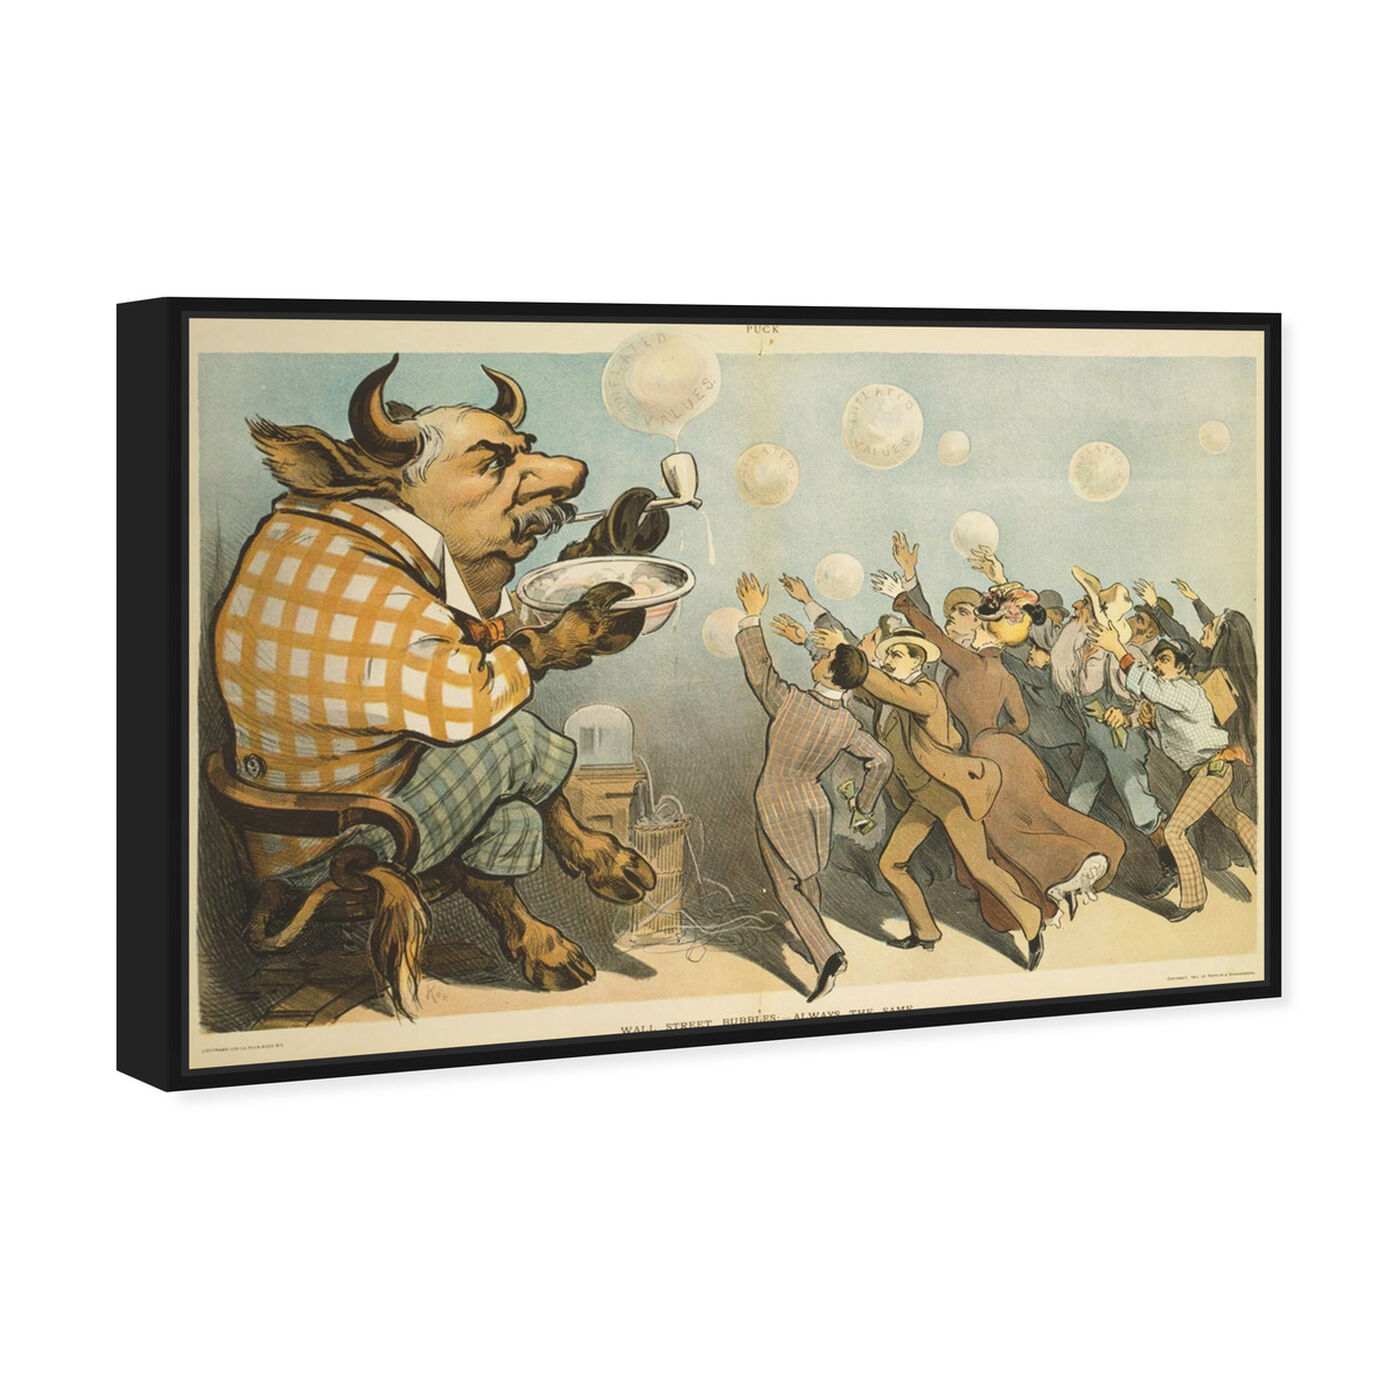 Angled view of Wall Street Bubbles featuring classic and figurative and modern classic art.